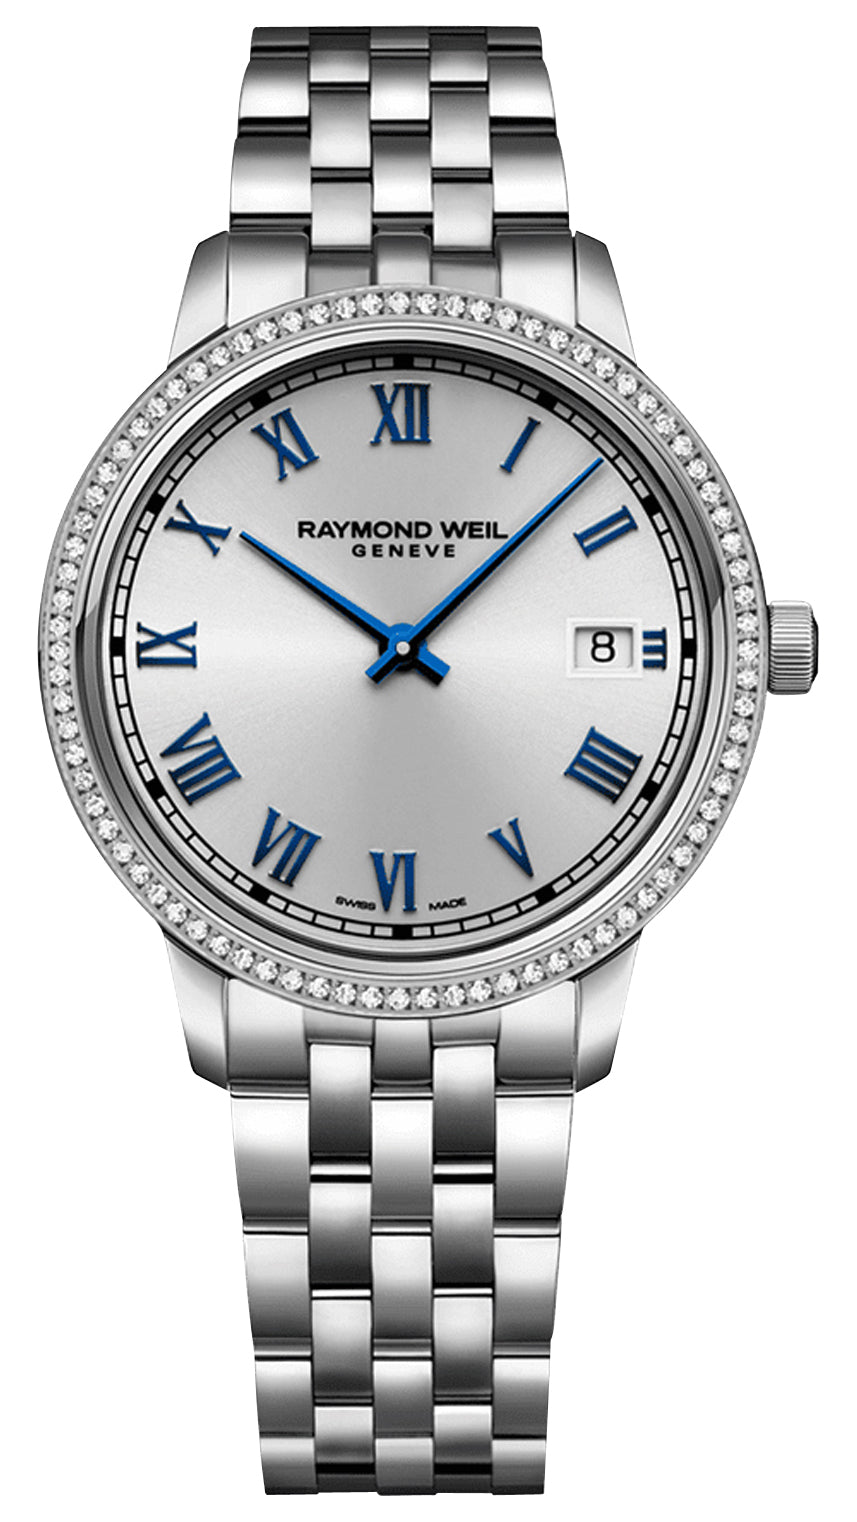 update alt-text with template Watches - Womens-Raymond Weil-5385-STS-00653-30 - 35 mm, date, diamonds / gems, new arrivals, Raymond Weil, round, rpSKU_5132-S1S-52181, rpSKU_5985-SCS-00653, rpSKU_FC-310WDHB3BD6B, rpSKU_MWW06T000144, rpSKU_R27057732, silver-tone, stainless steel band, stainless steel case, swiss quartz, Toccata, watches, womens, womenswatches-Watches & Beyond